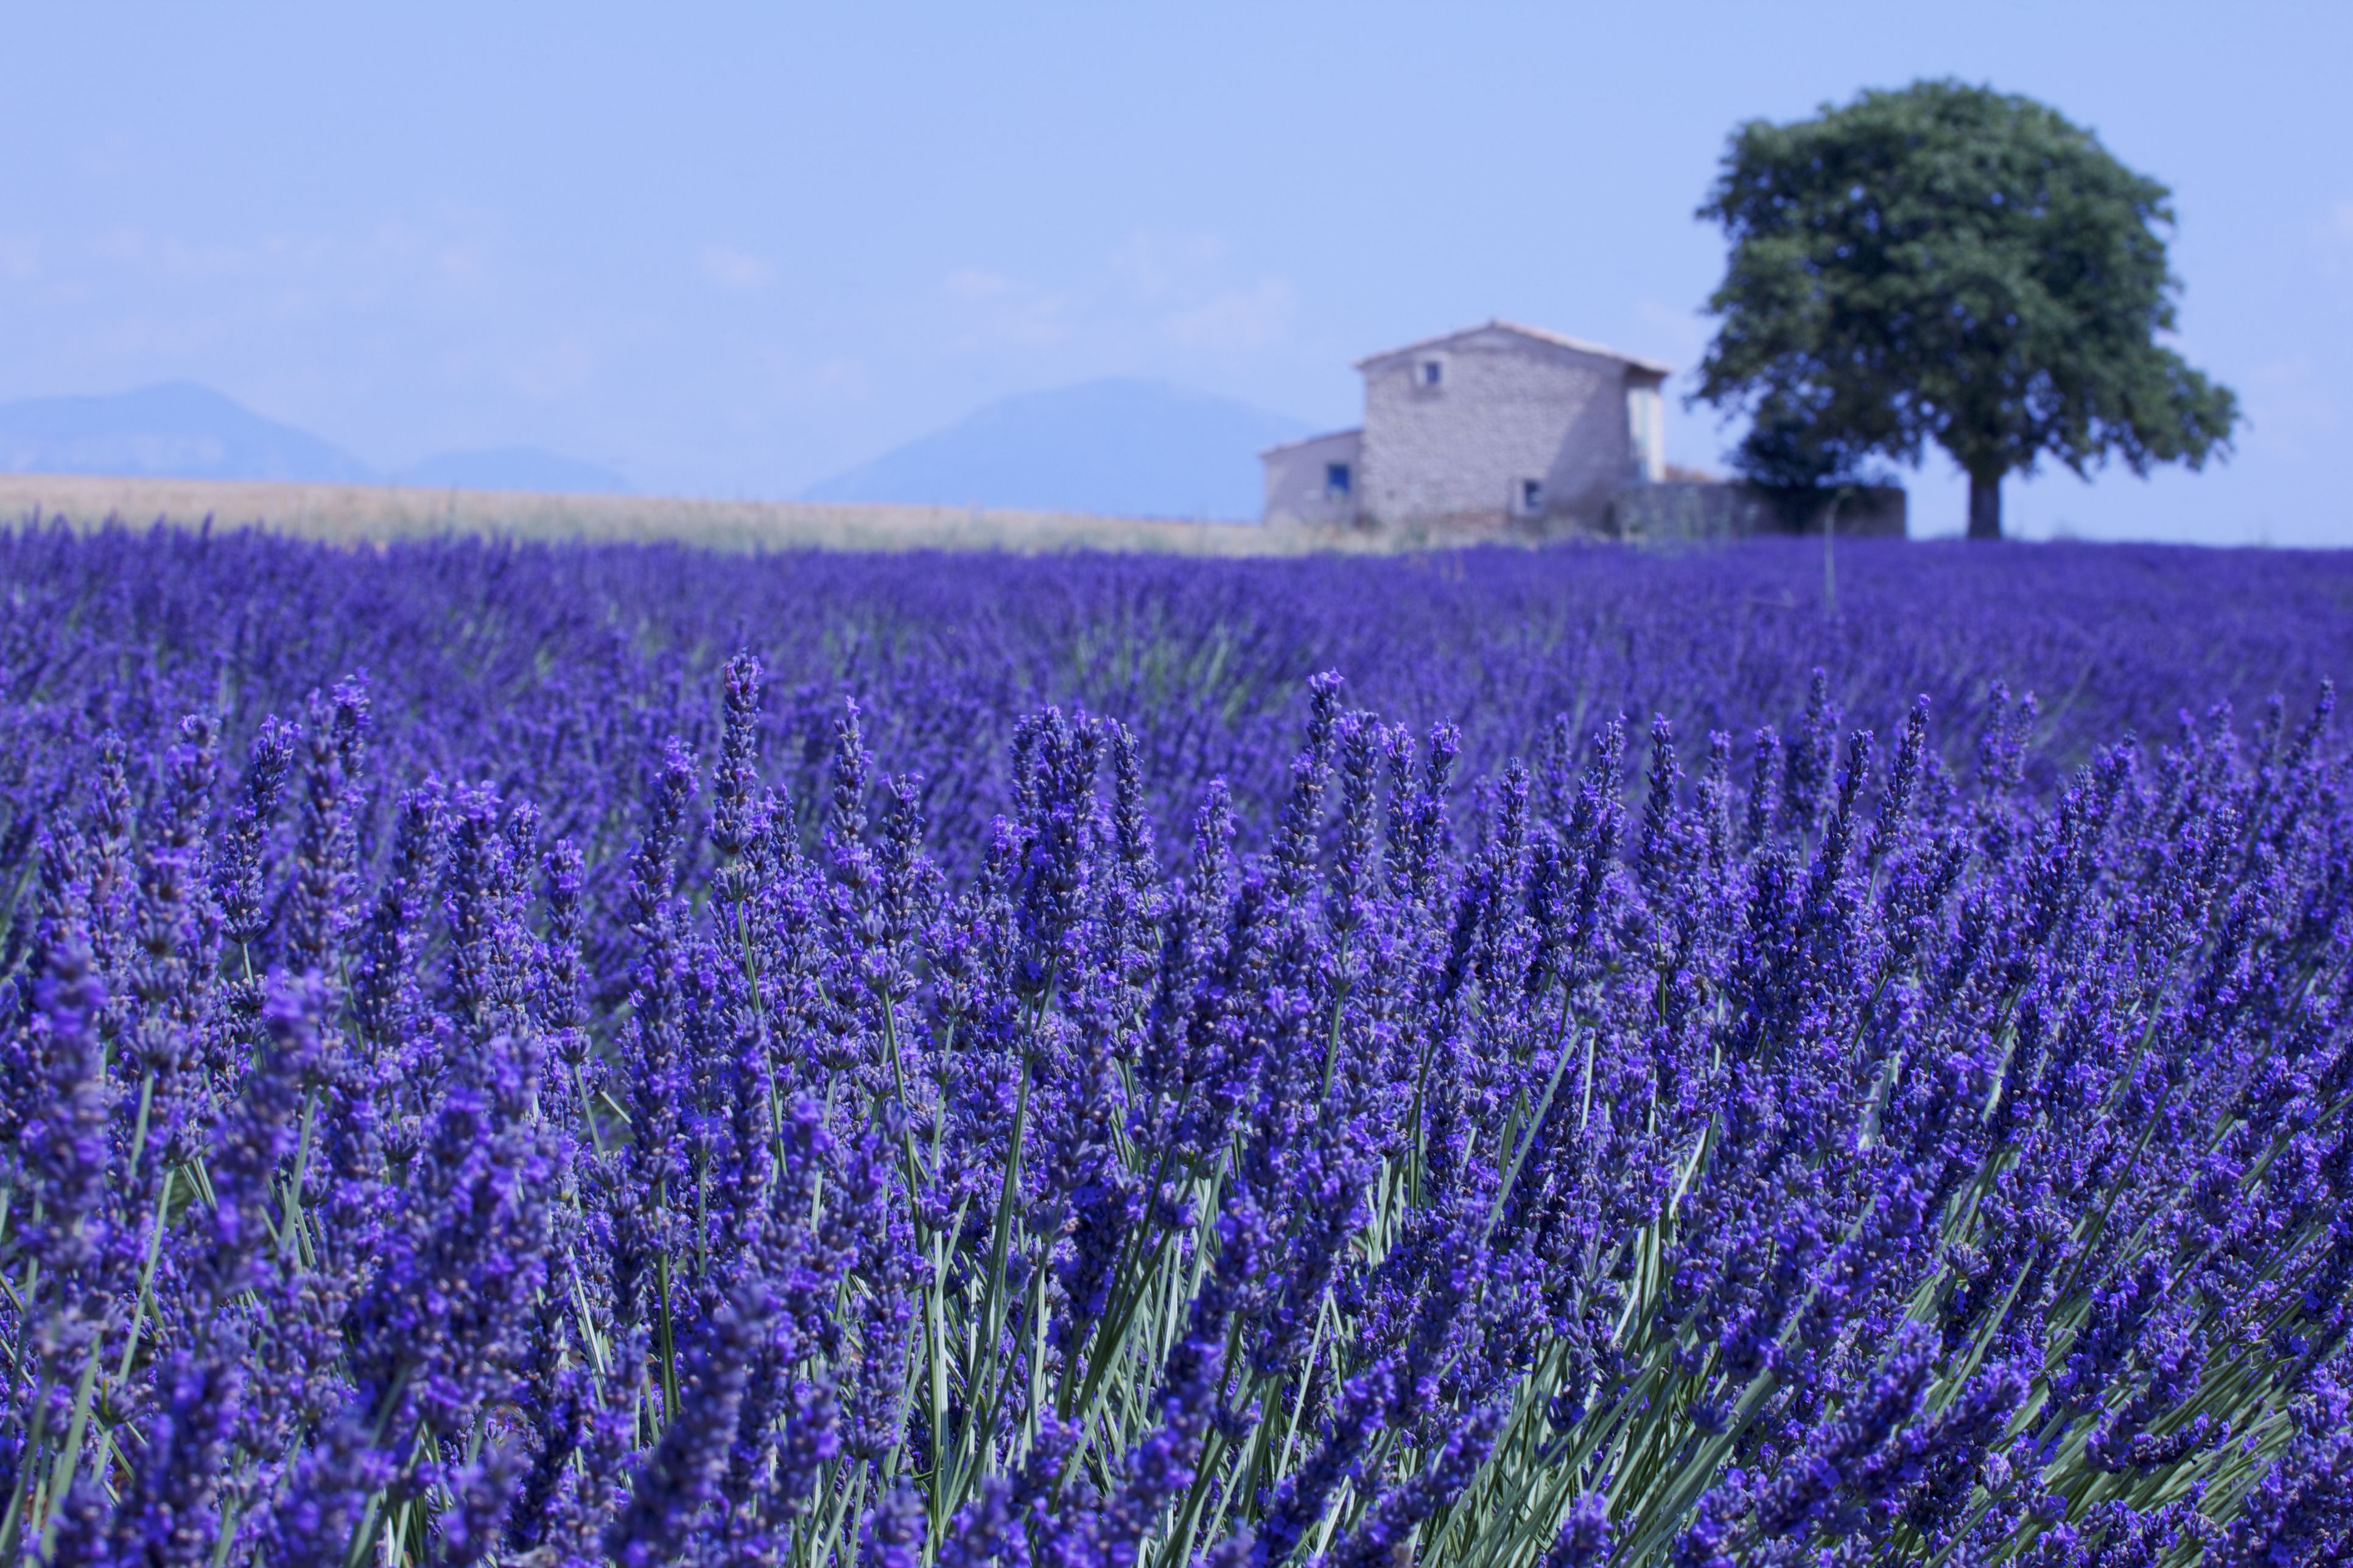 Lavender Menace: the Phrase, the Group, the Controversy